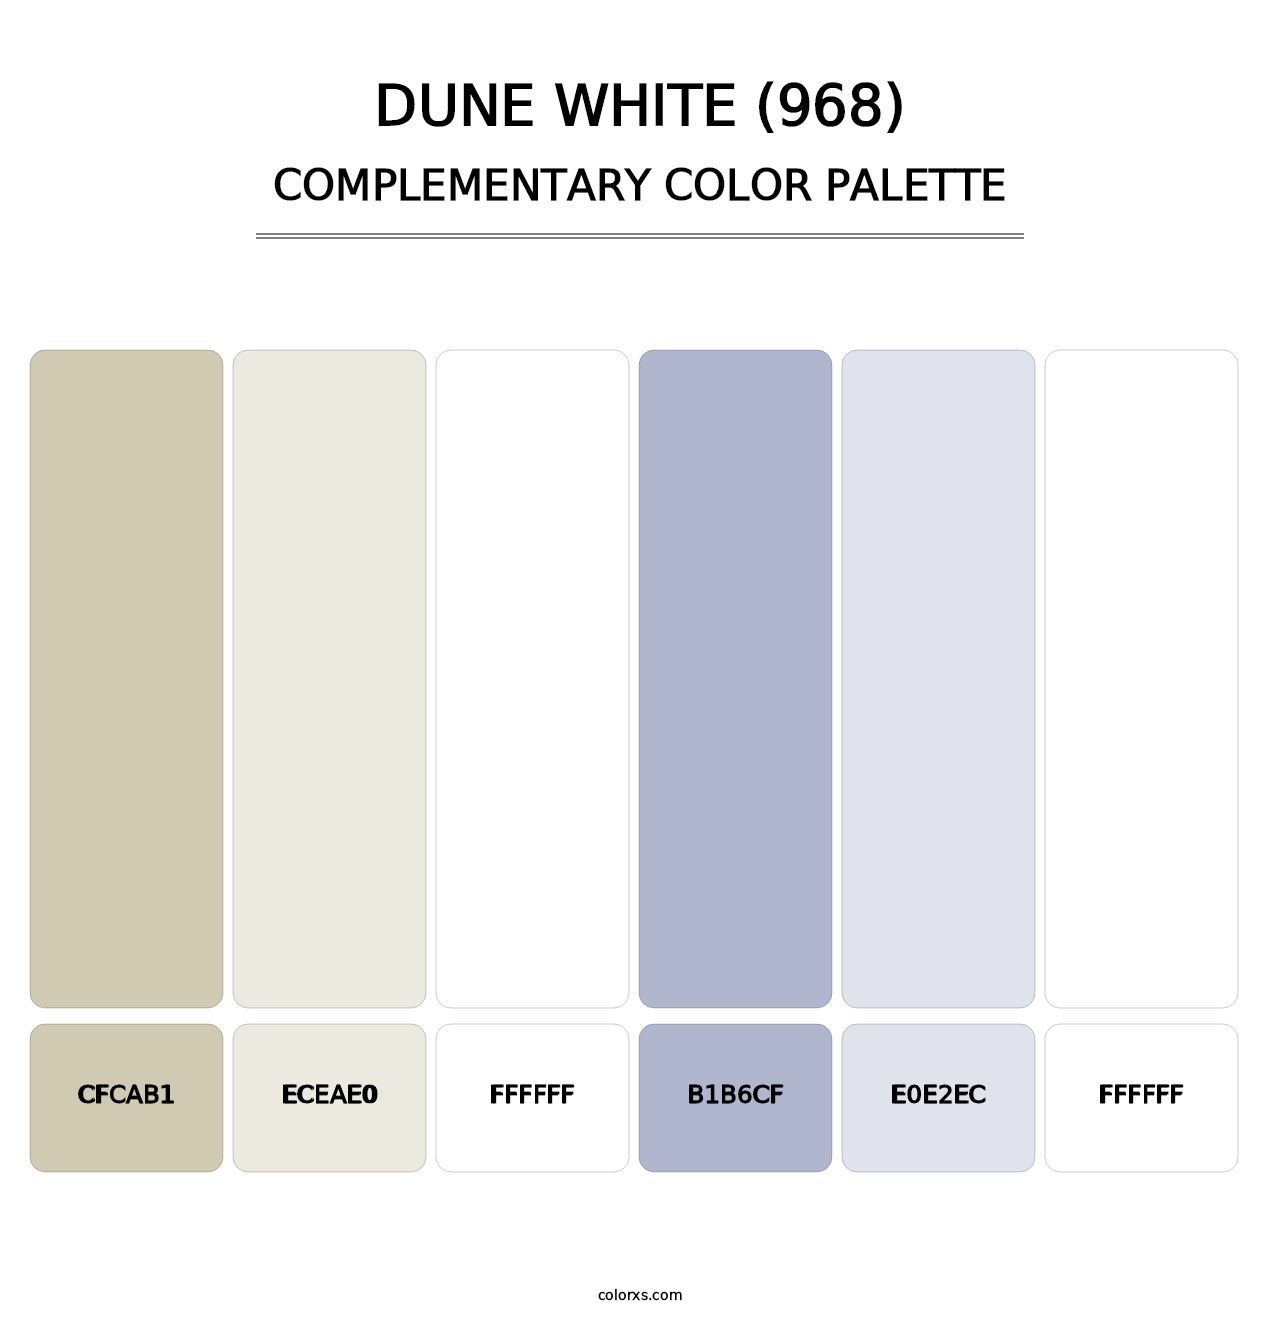 Dune White (968) - Complementary Color Palette